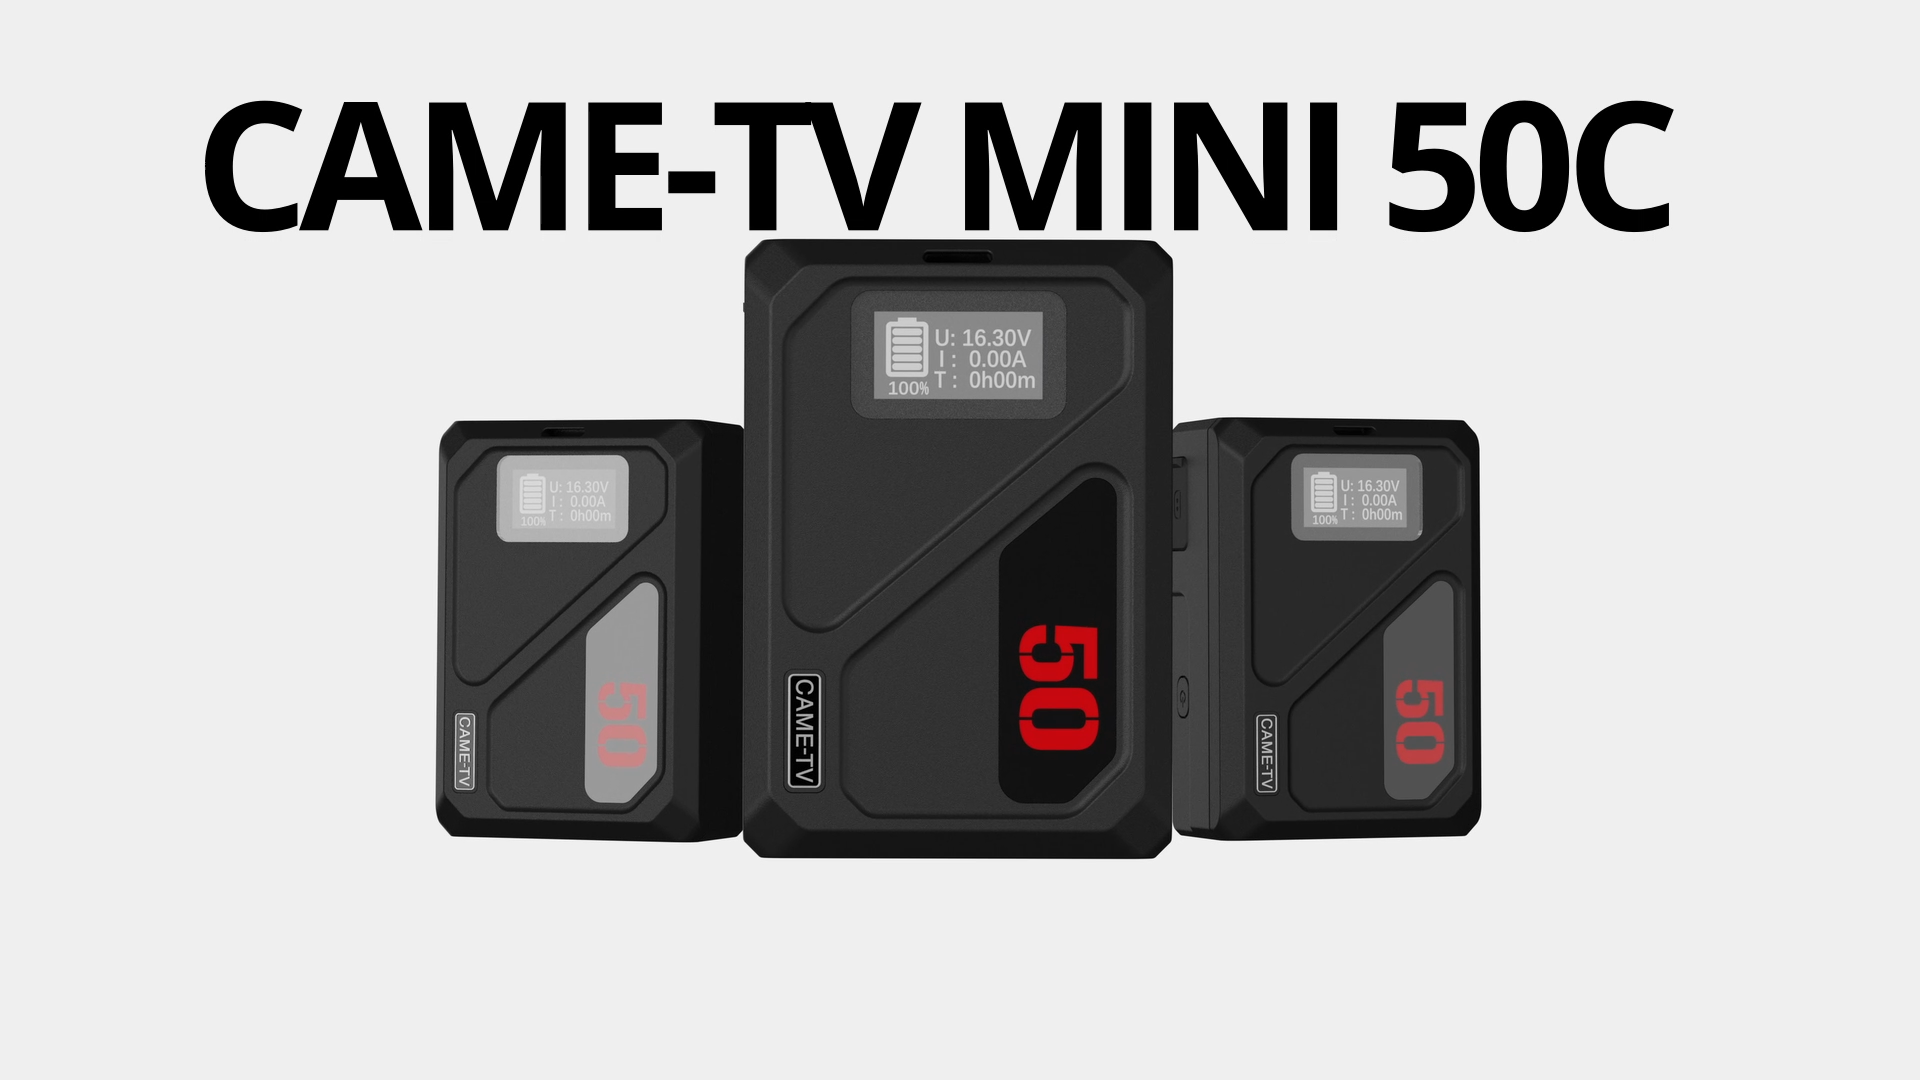 CAME-TV Mini 50C D-Tap V-Mount Lightweight Battery Featuring Samsung 18650, Bidirectional USB-C along with USB-A Ports